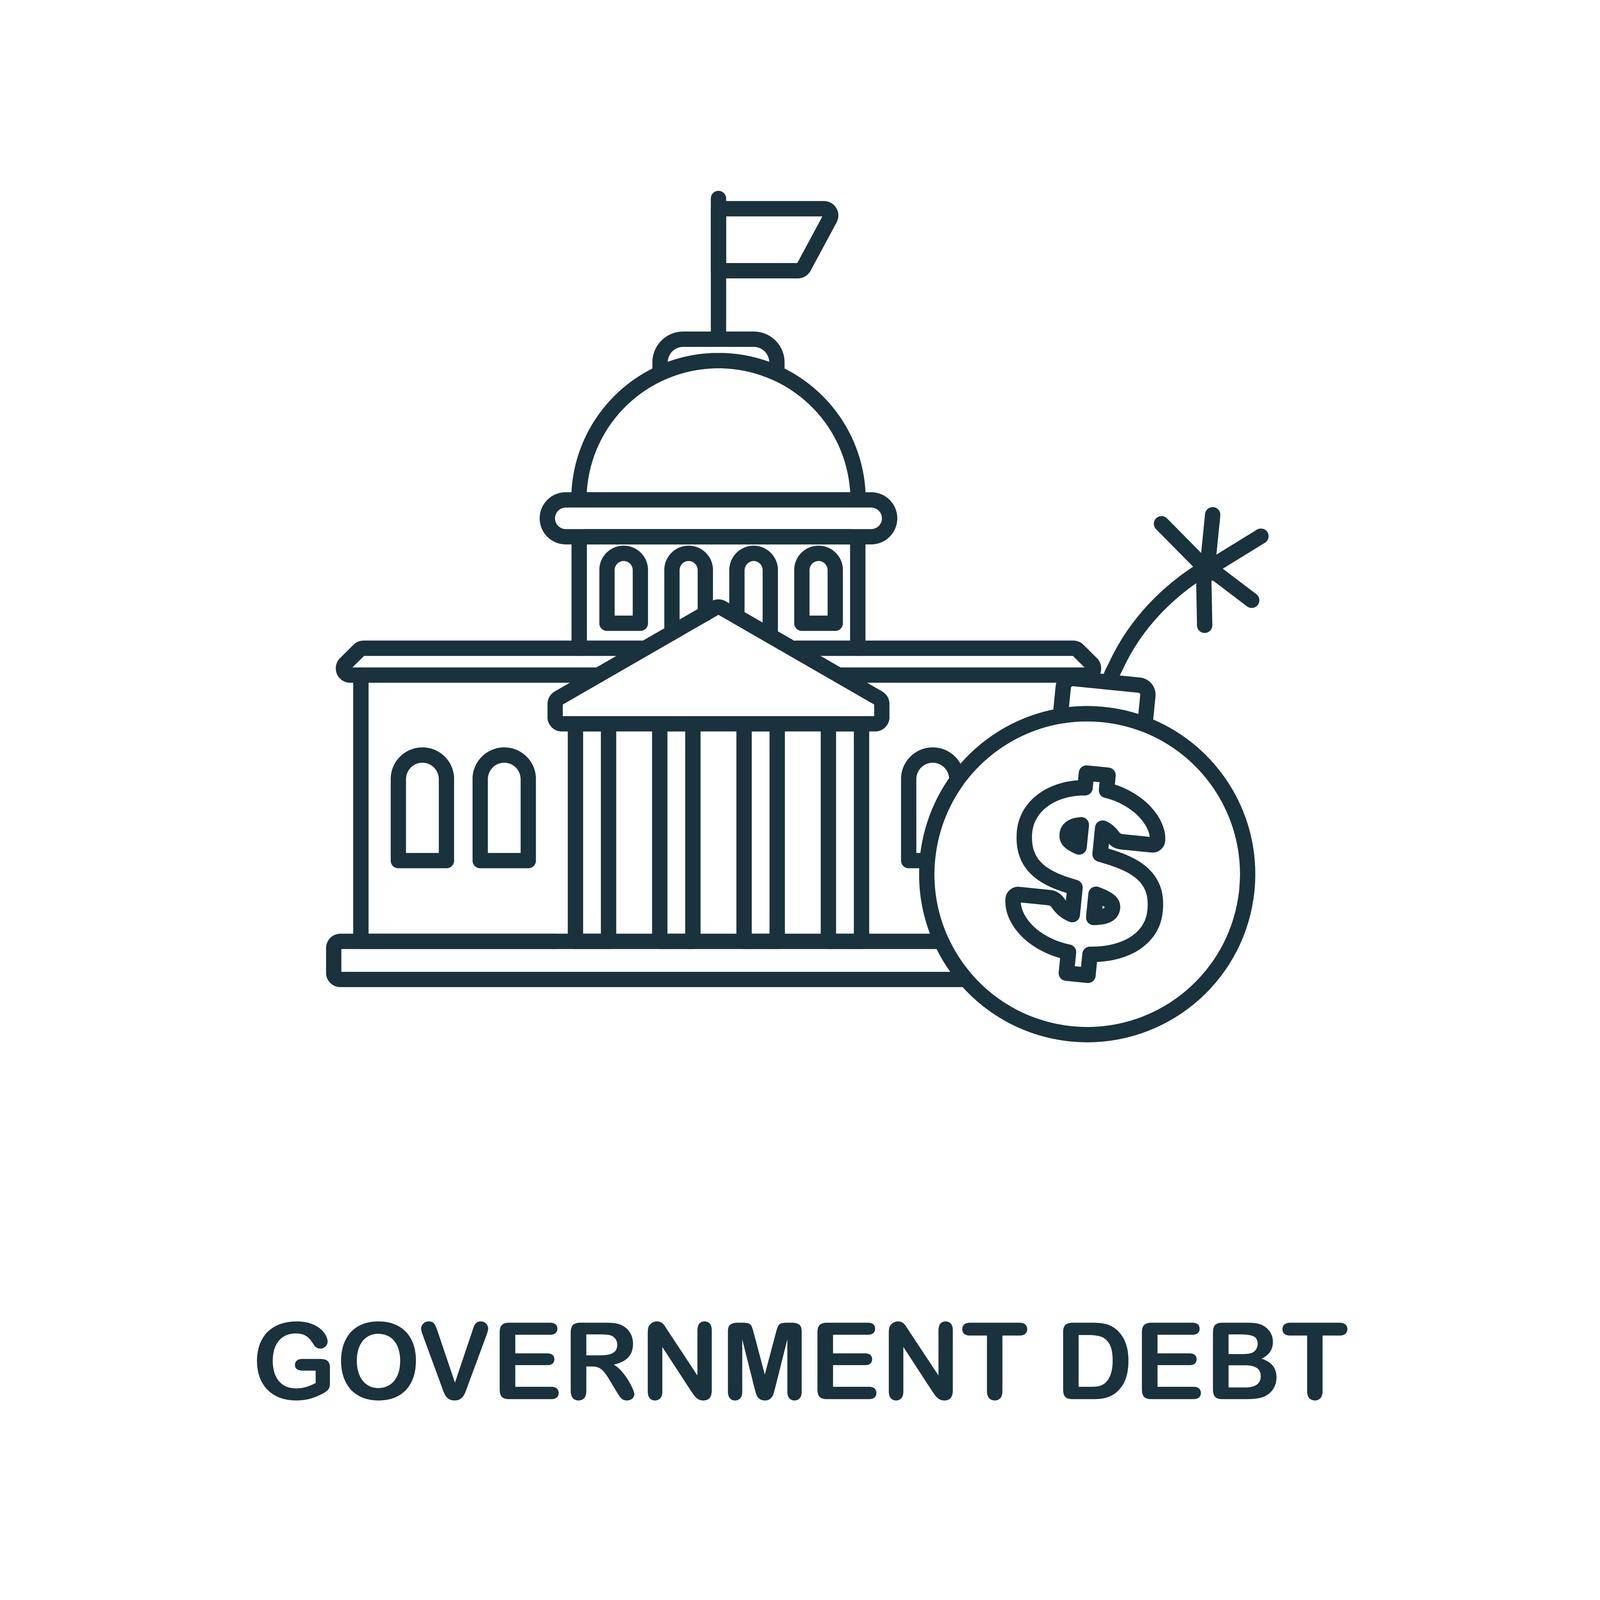 Government Debt icon. Outline sign from economic crisis collection. Line Government Debt icon for infographics, wed design and more.